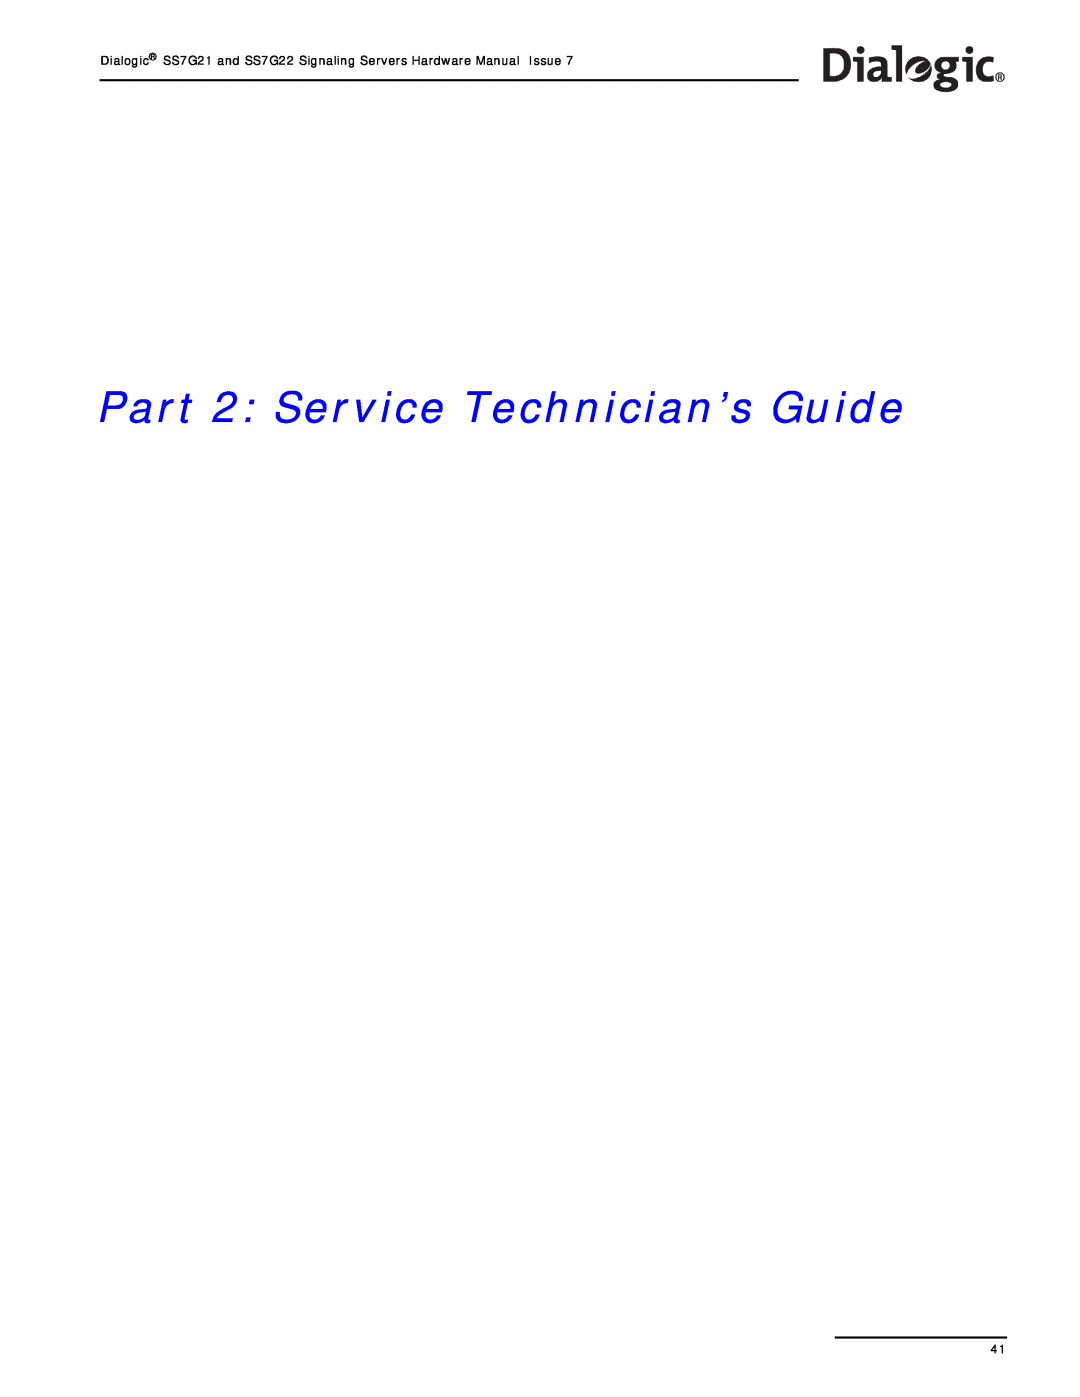 Dialogic manual Part 2 Service Technician’s Guide, Dialogic SS7G21 and SS7G22 Signaling Servers Hardware Manual Issue 